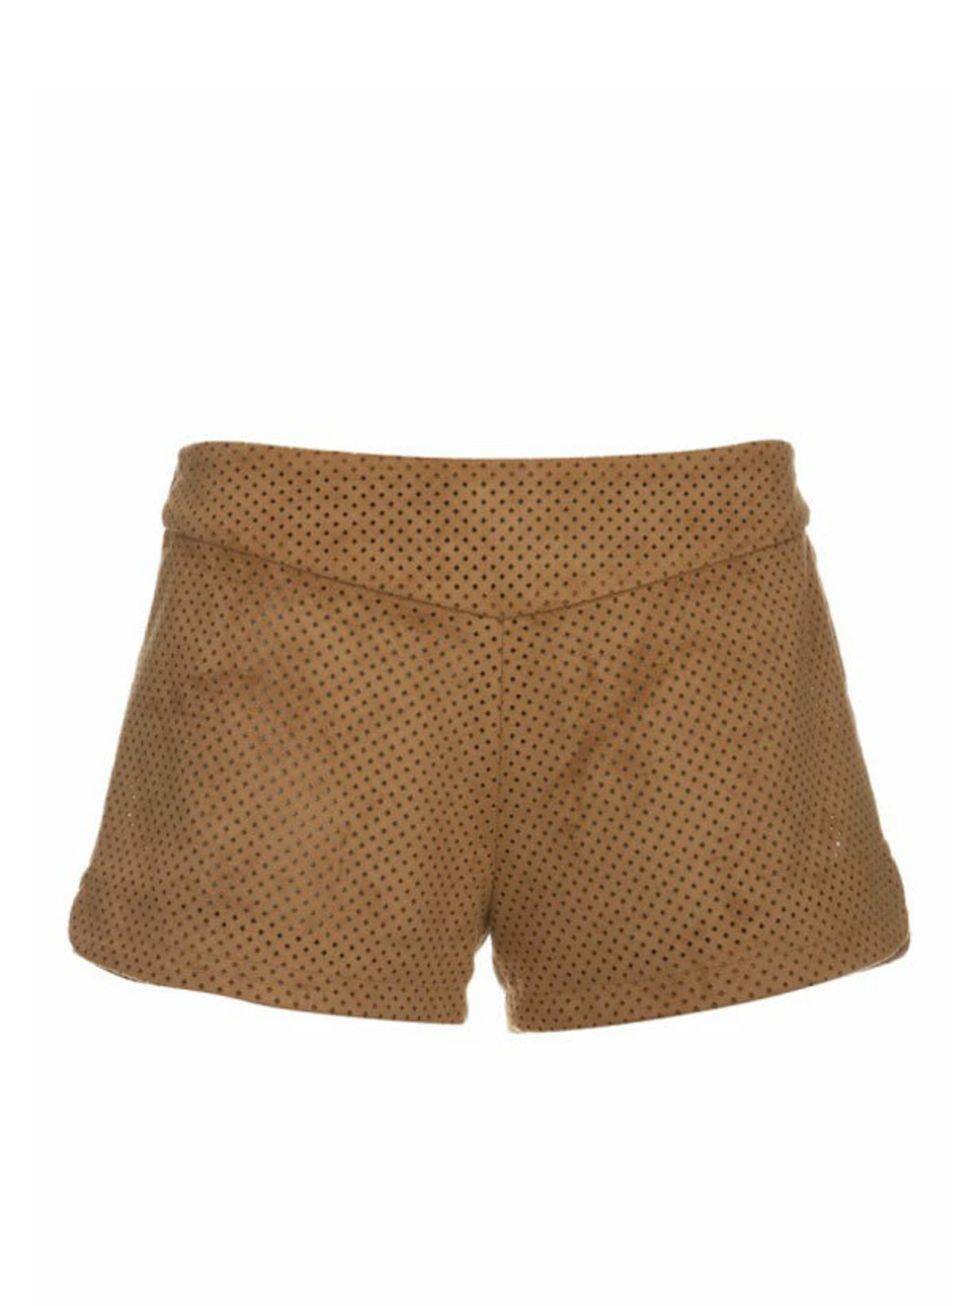 <p>Tan suede shorts, £150, by Reality Studio at Topshop (0845 121 4519)</p>